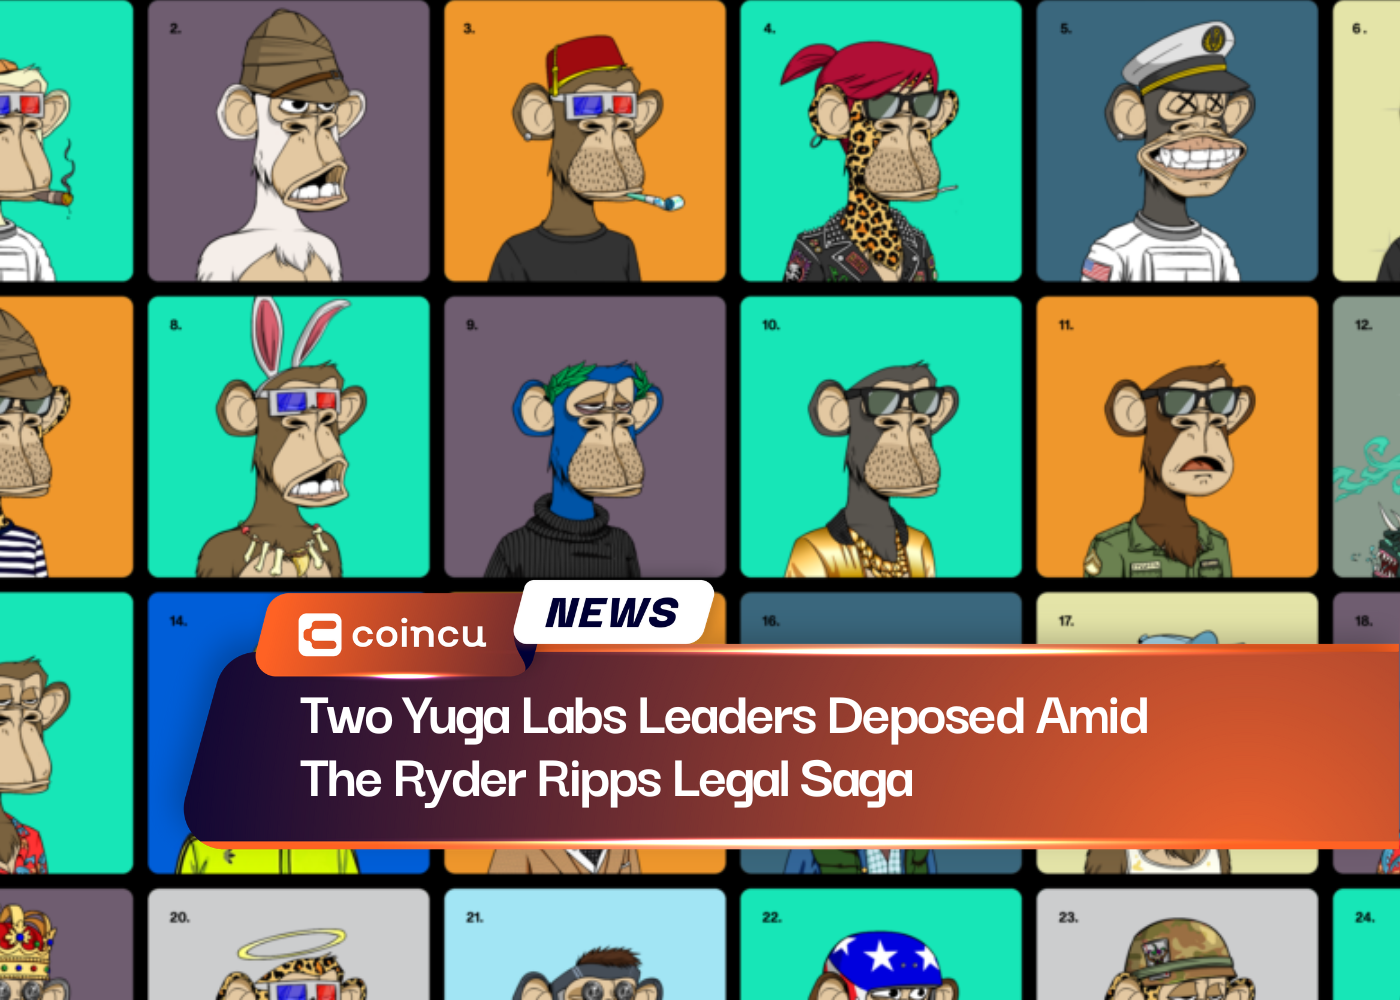 Two Yuga Labs Leaders Deposed Amid The Ryder Ripps Legal Saga